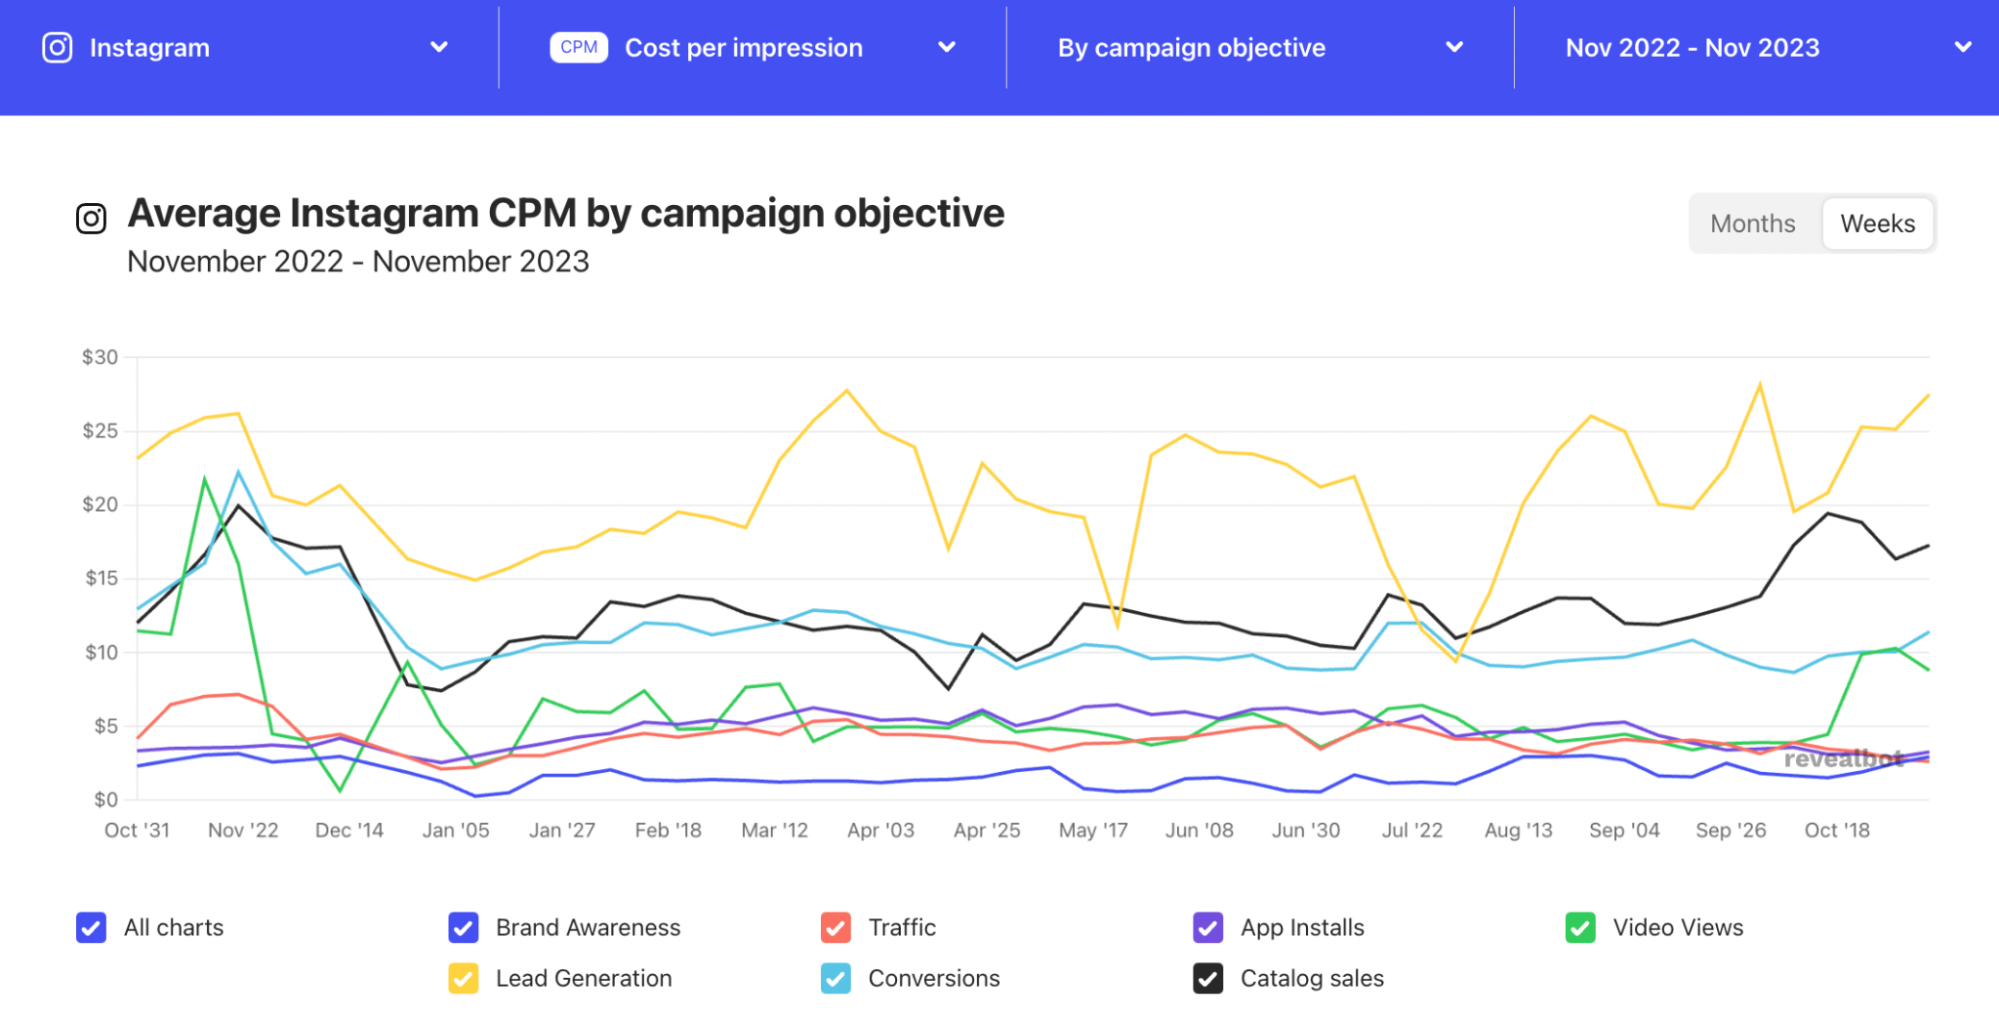 Graph showing the average Instagram CPM filtered by campaign objective from October 2022 to October 2023